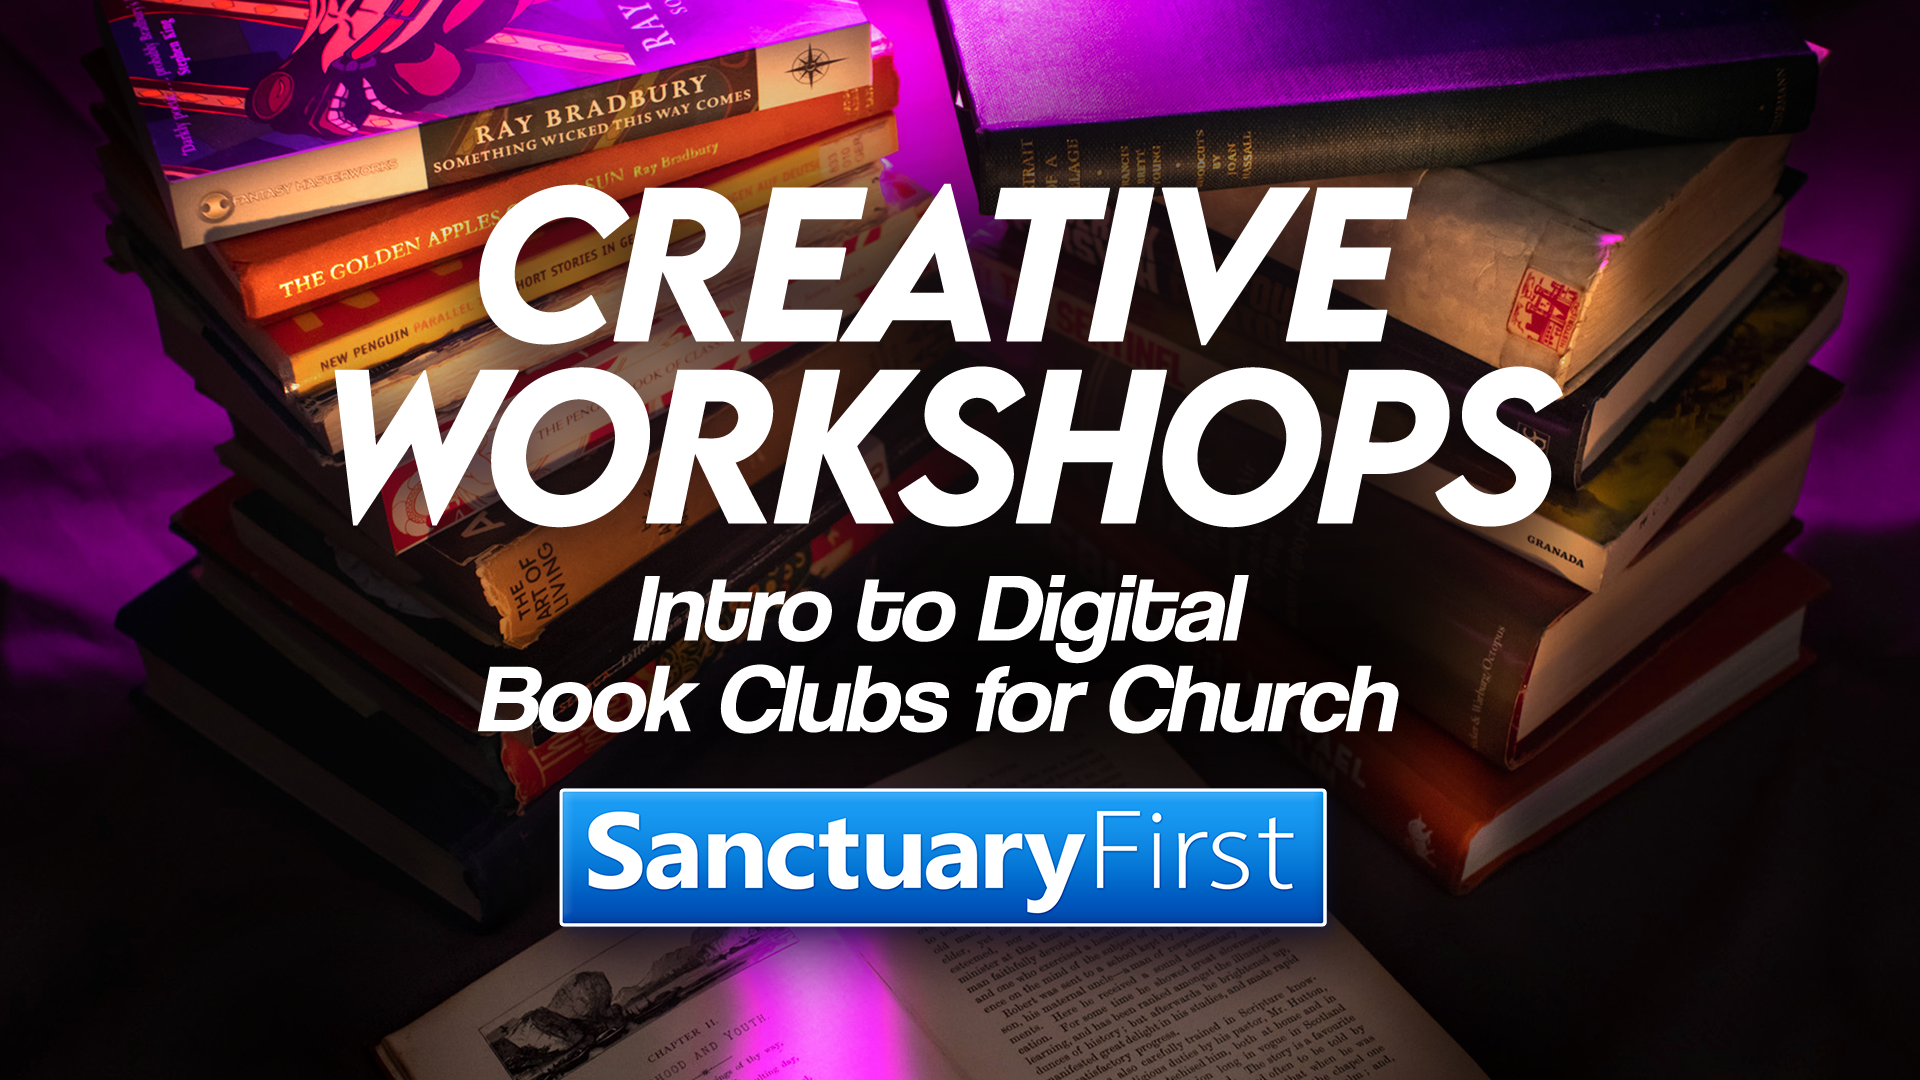 Creative Workshops - Intro to Digital Book Clubs for Church